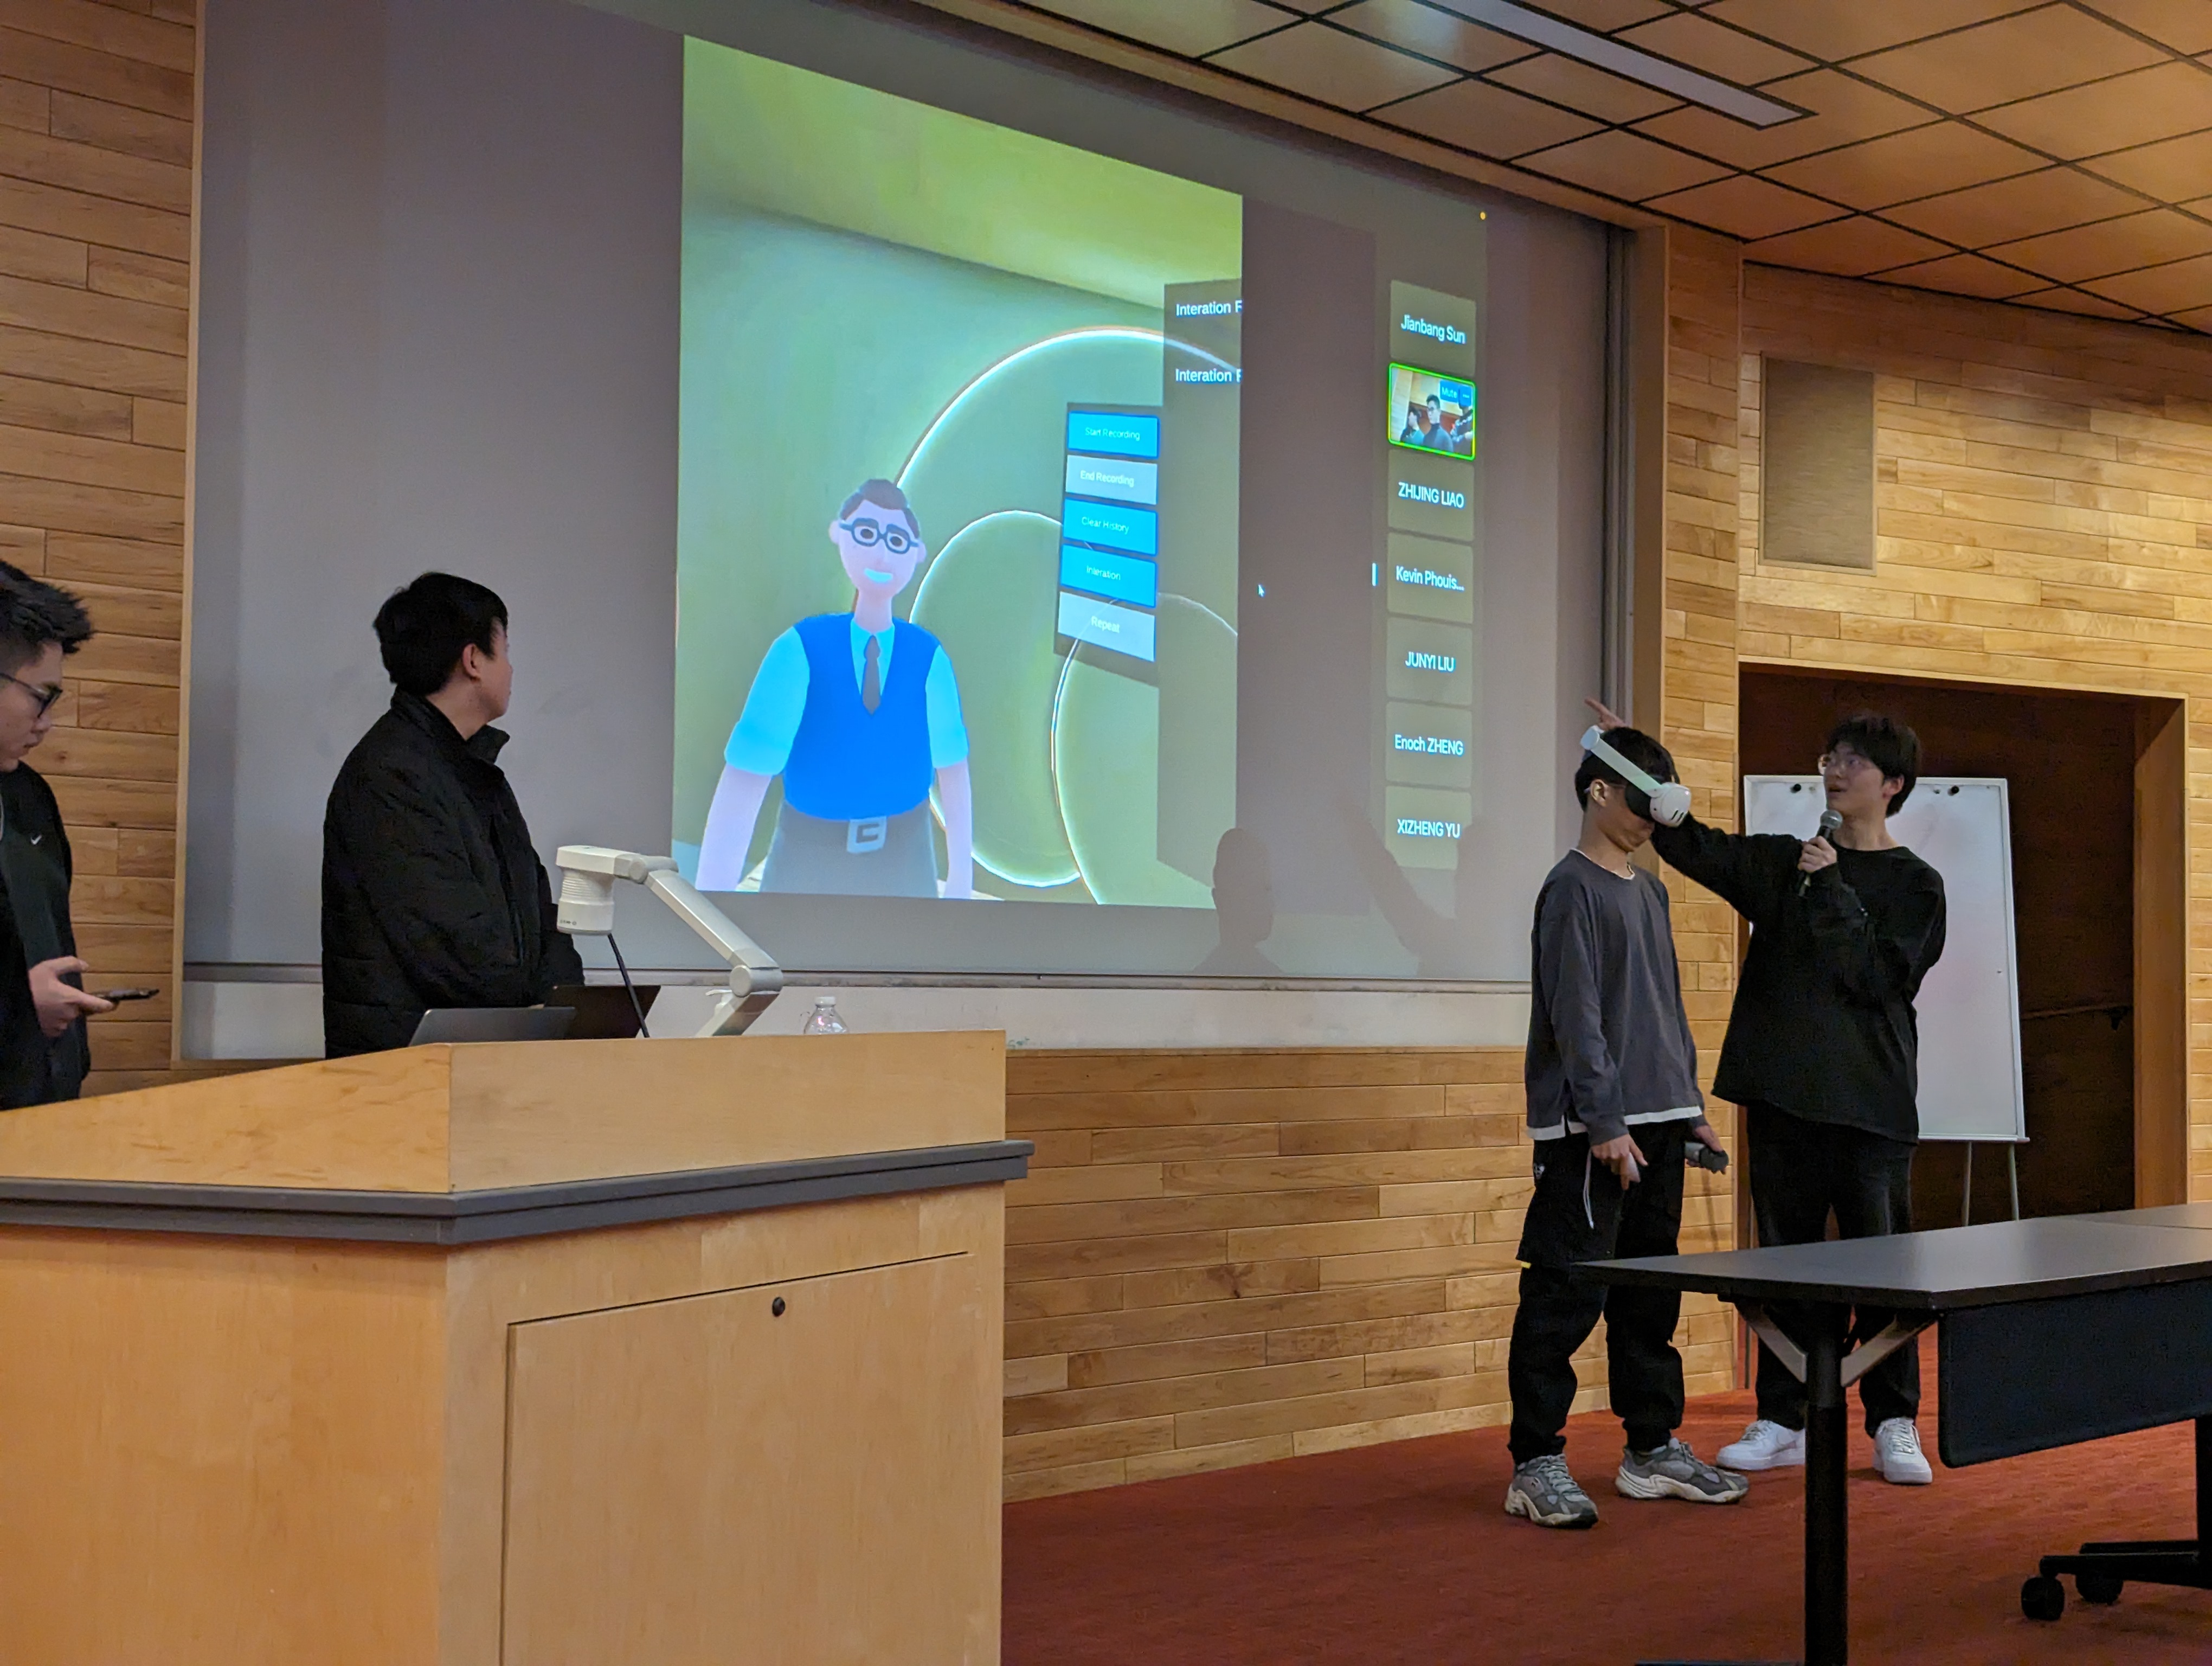 Holos team demonstrates their VR-based Capstone project